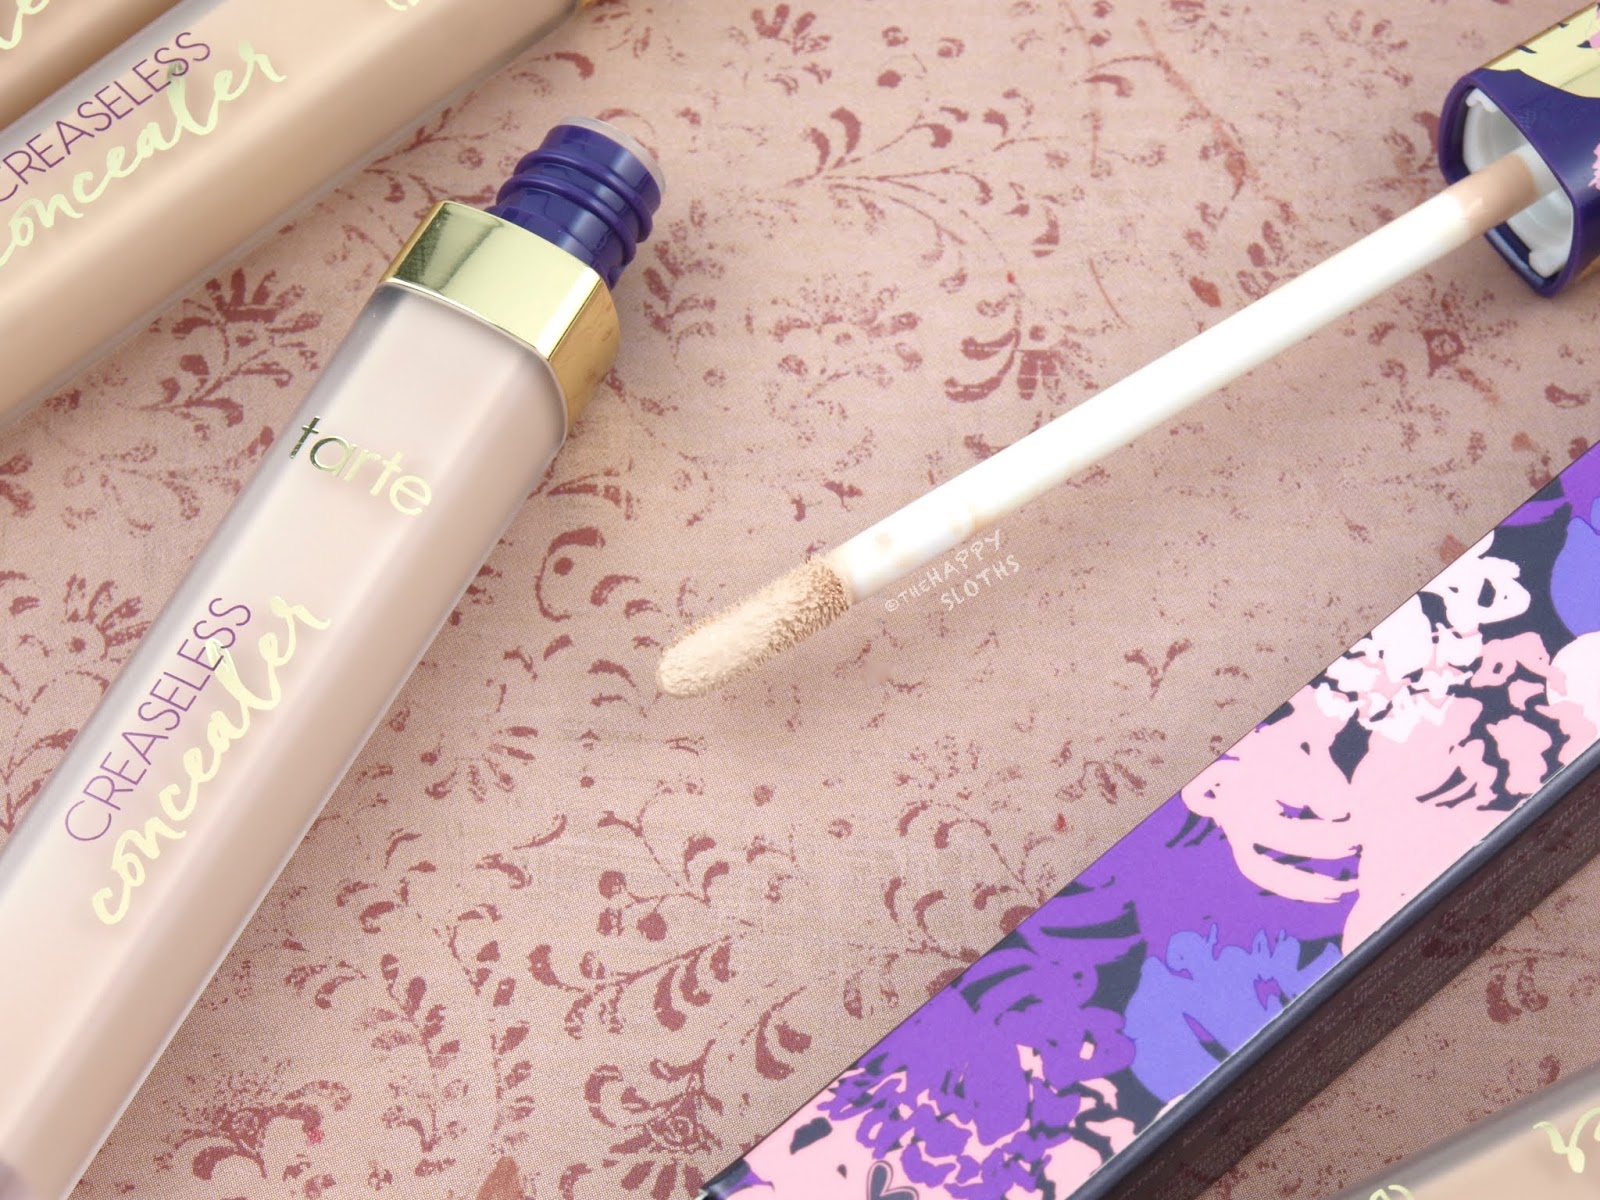 Tarte | Creaseless Concealer: Review and Swatches